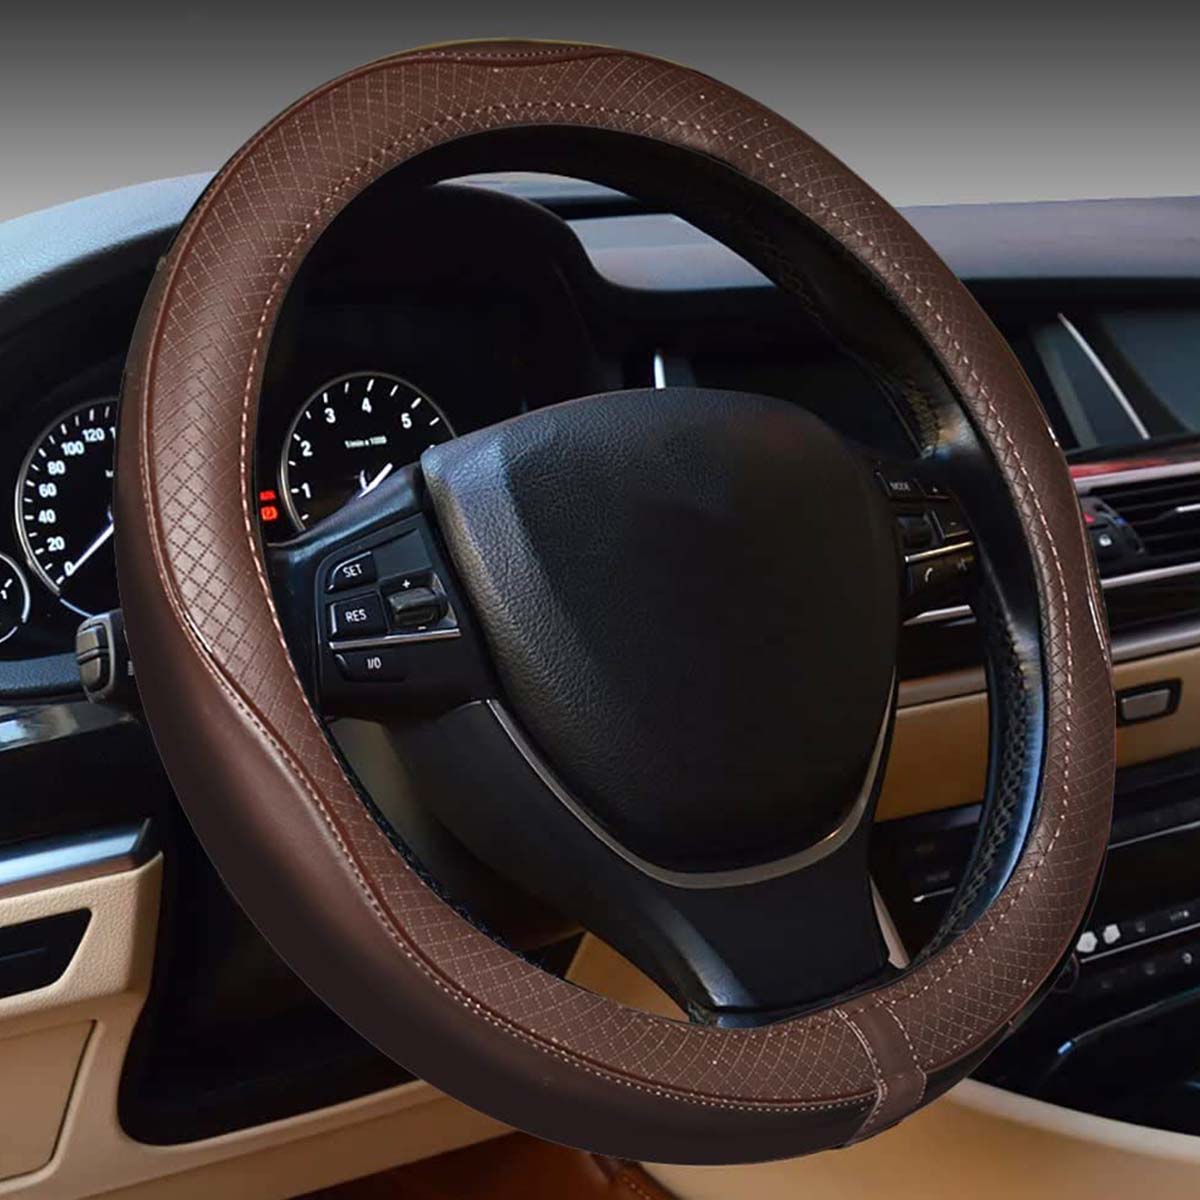 Car Steering Wheel Cover, Custom For Your Cars, Anti-Slip, Safety, Soft, Breathable, Heavy Duty, Thick, Full Surround, Sports Style, Car Accessories MS18990